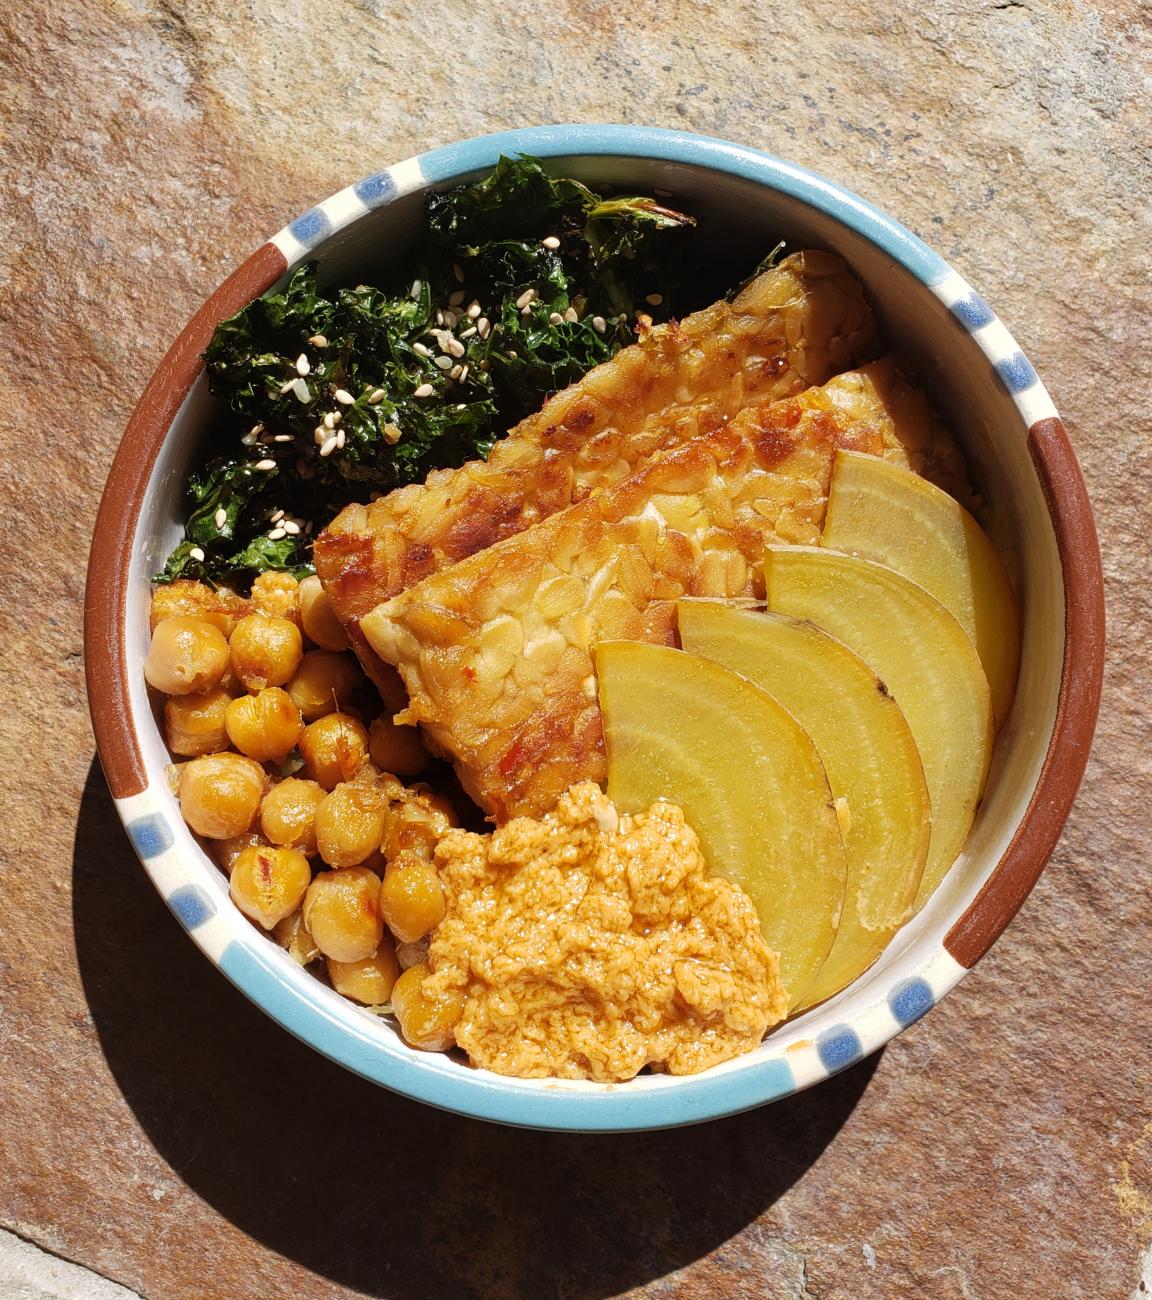 Bowl with kale, tofu, chickpeas, and onions.